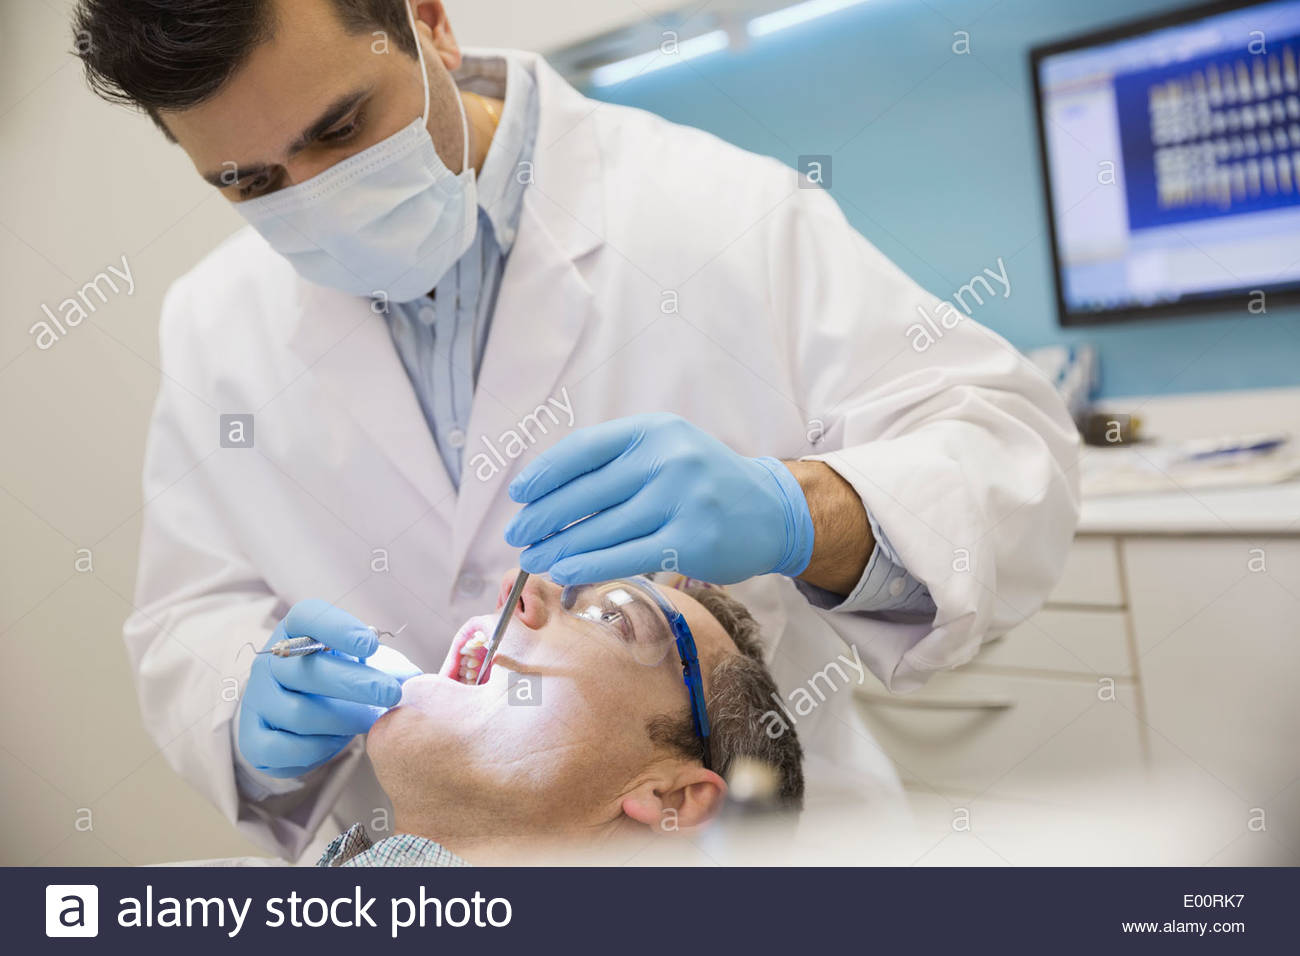 Dentist in surgical mask examining patients mouth Stock Photo